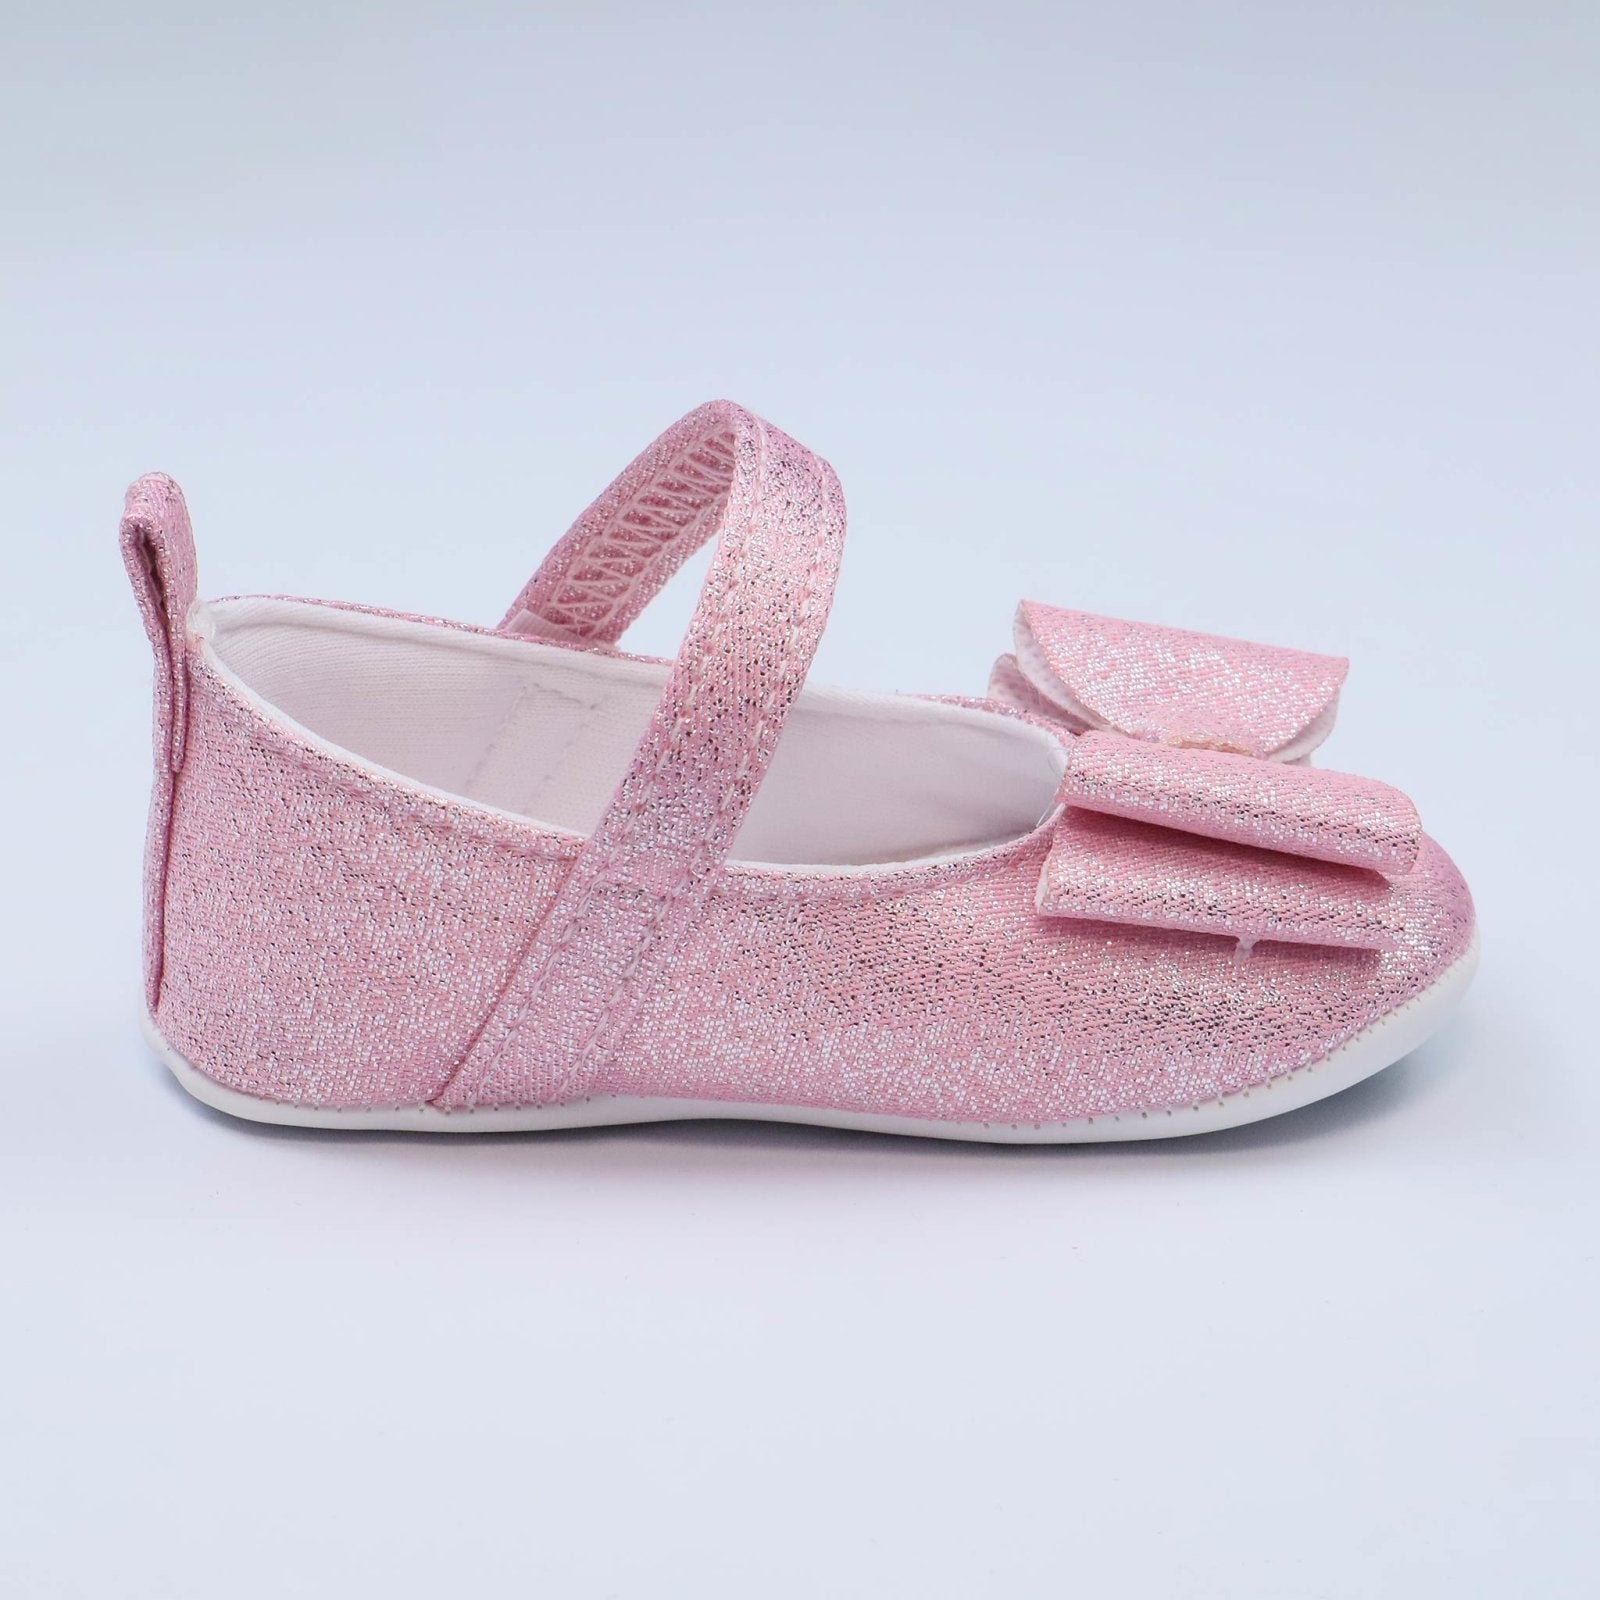 Baby Shoes Pink Glitter by Baby Pattini